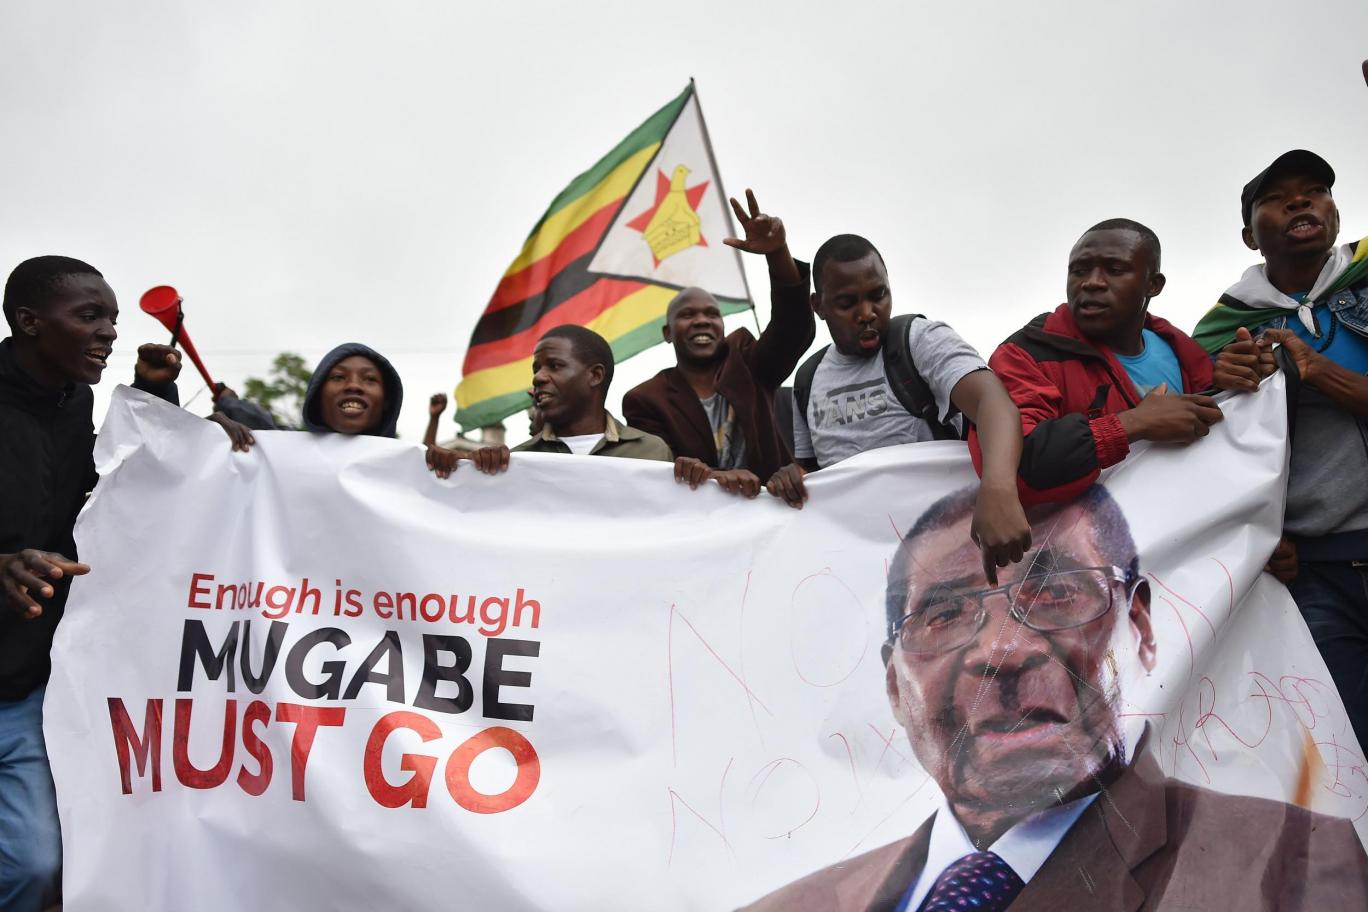 School disruptions following Mugabe’s ouster by army generals